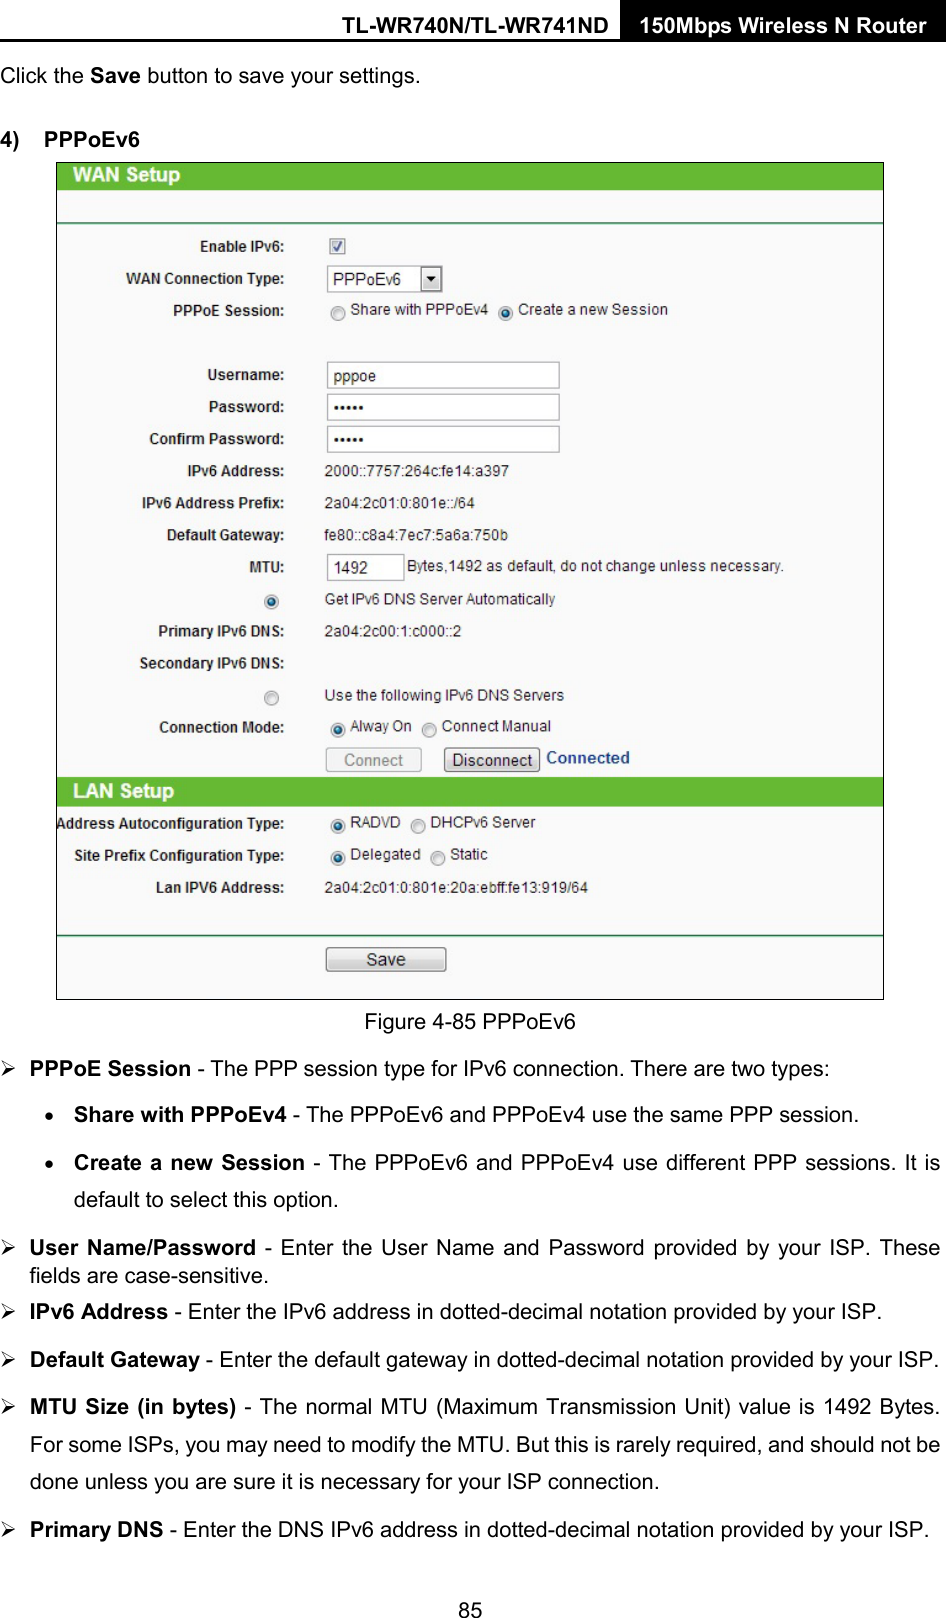 TL-WR740N/TL-WR741ND 150Mbps Wireless N Router  Click the Save button to save your settings. 4) PPPoEv6  Figure 4-85 PPPoEv6  PPPoE Session - The PPP session type for IPv6 connection. There are two types: • Share with PPPoEv4 - The PPPoEv6 and PPPoEv4 use the same PPP session. • Create a new Session - The PPPoEv6 and PPPoEv4 use different PPP sessions. It is default to select this option.  User Name/Password - Enter the User Name and Password provided by your ISP. These fields are case-sensitive.  IPv6 Address - Enter the IPv6 address in dotted-decimal notation provided by your ISP.  Default Gateway - Enter the default gateway in dotted-decimal notation provided by your ISP.  MTU Size (in bytes) - The normal MTU (Maximum Transmission Unit) value is 1492 Bytes. For some ISPs, you may need to modify the MTU. But this is rarely required, and should not be done unless you are sure it is necessary for your ISP connection.  Primary DNS - Enter the DNS IPv6 address in dotted-decimal notation provided by your ISP. 85 